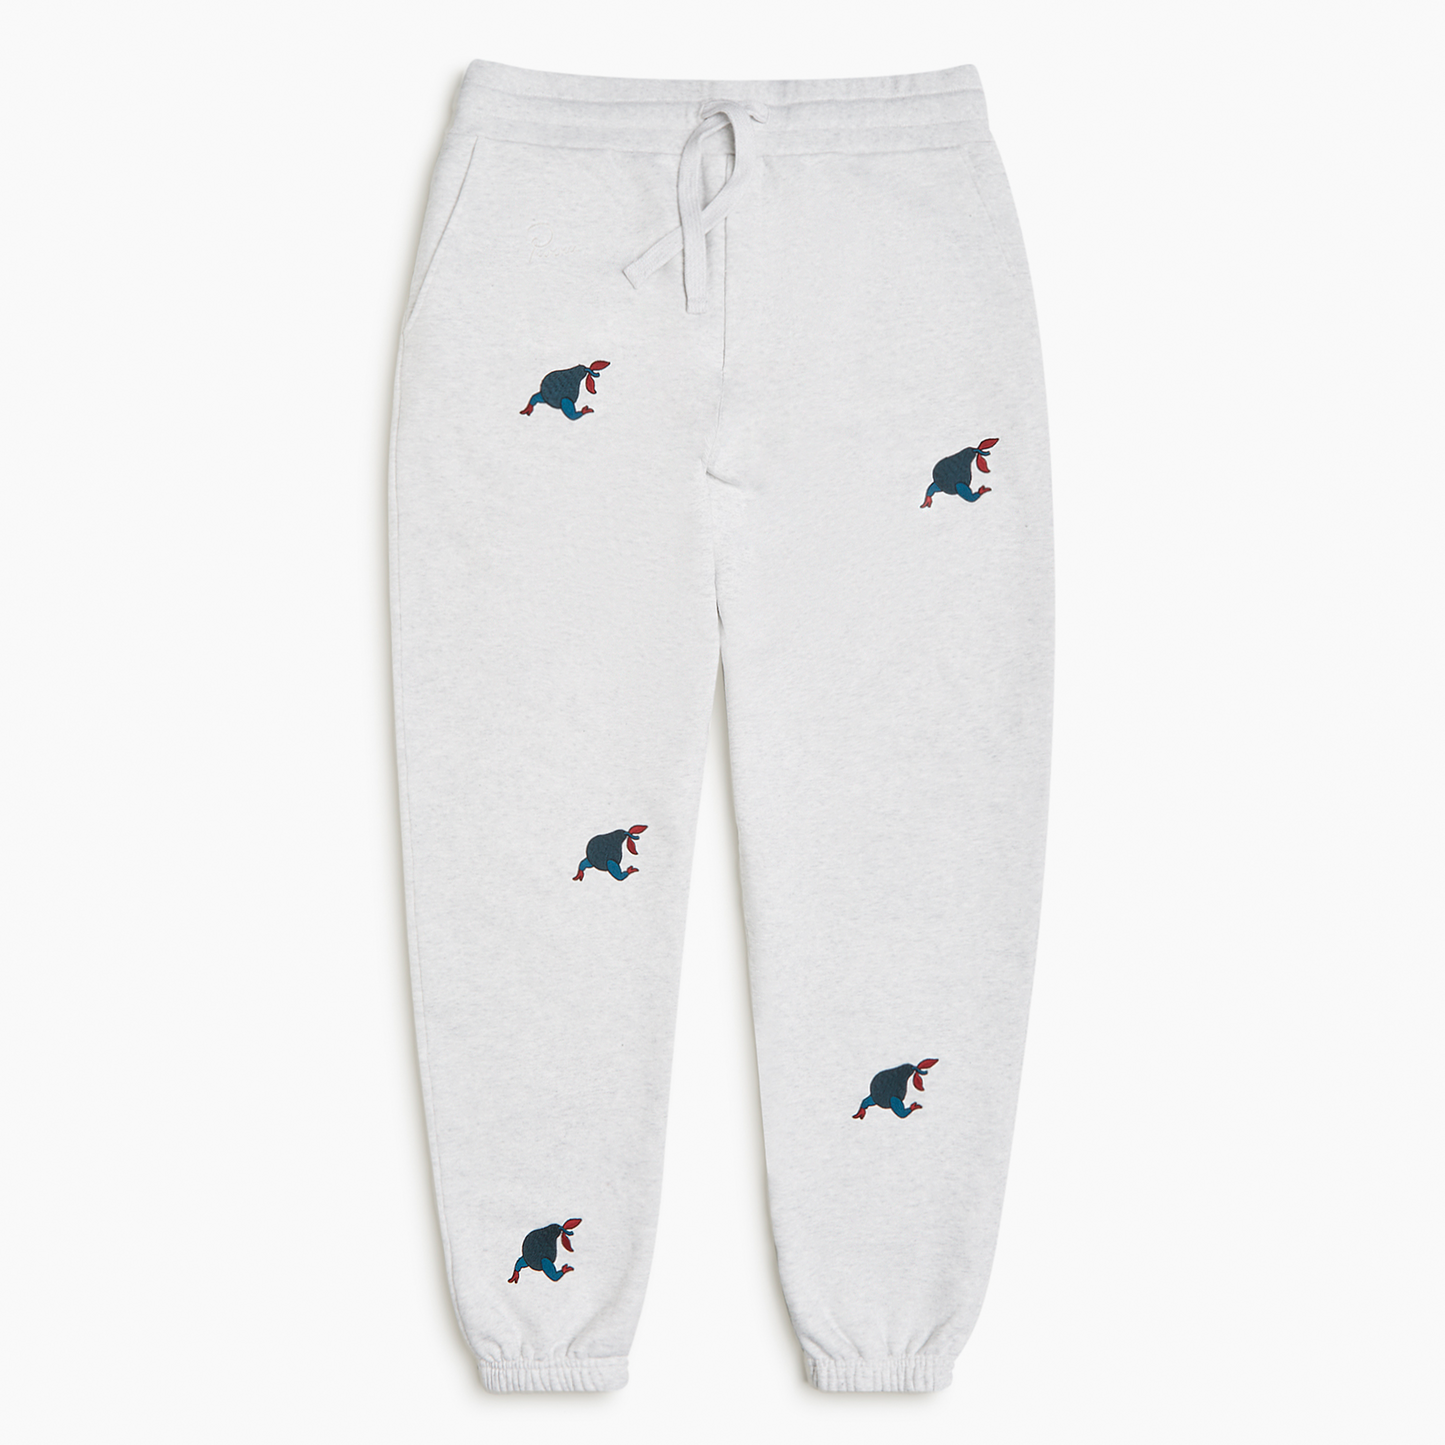 By Parra Running Pear Sweatpants